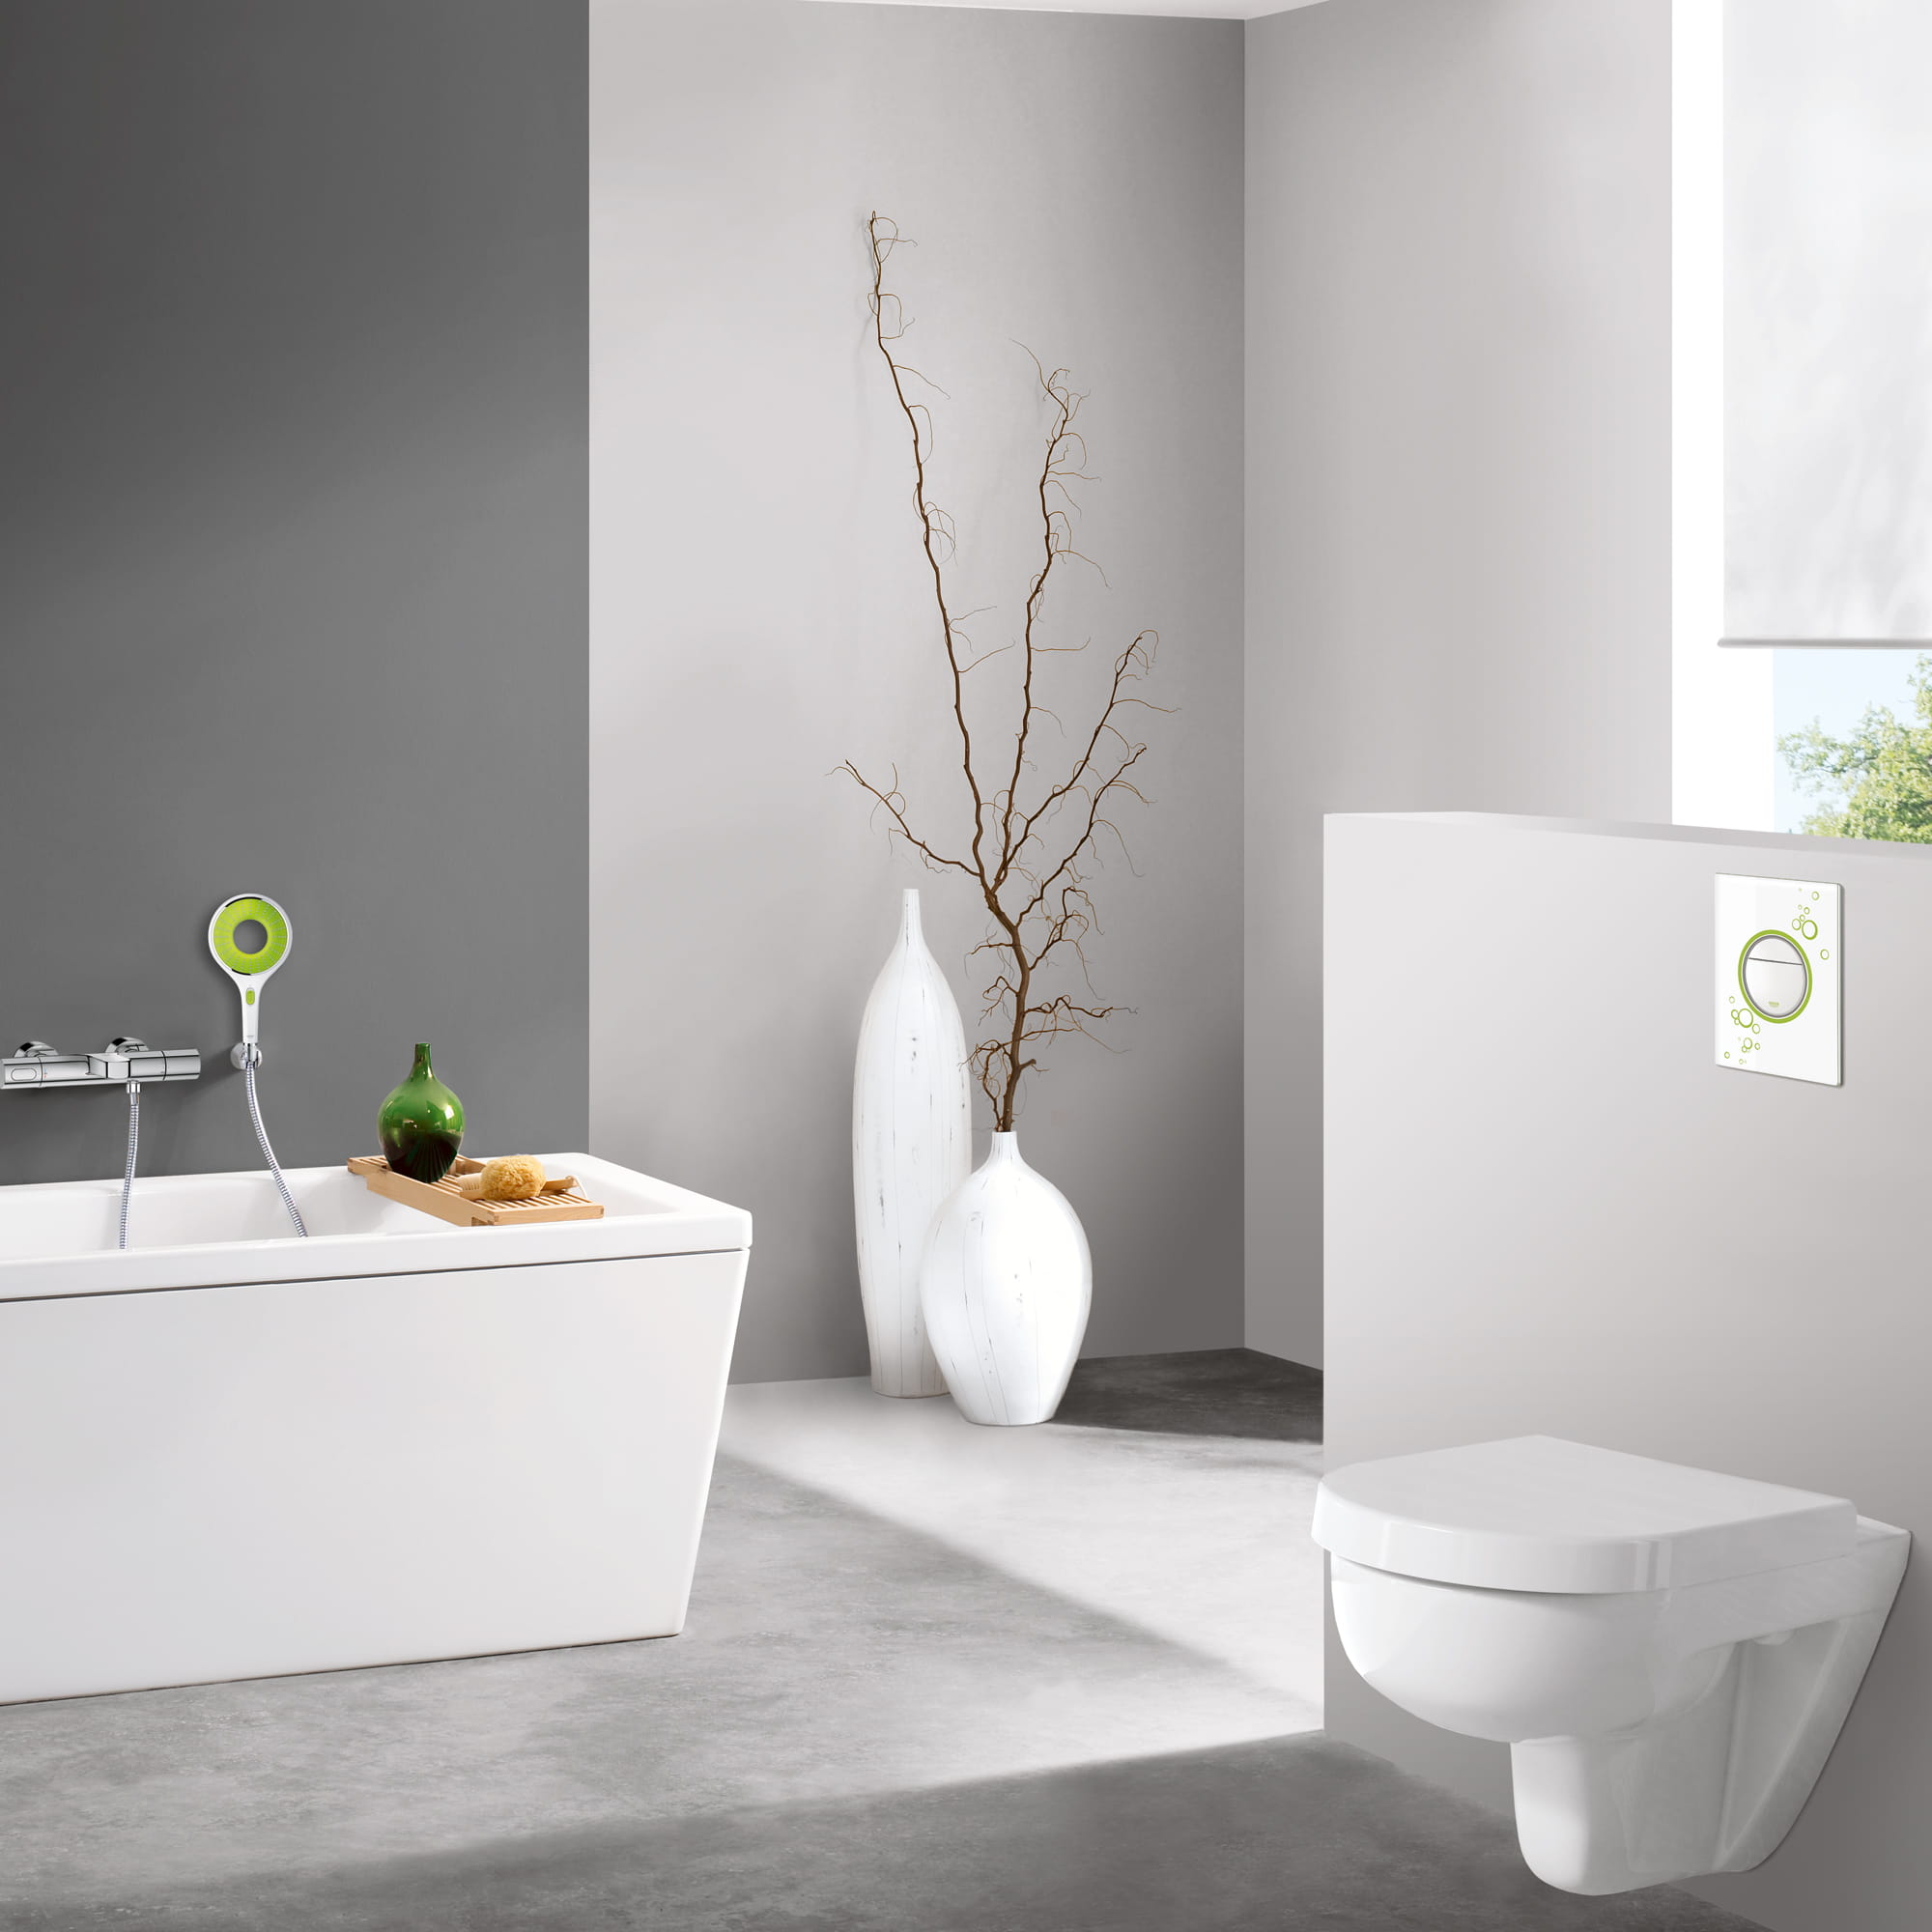 GROHE Toilet with green accents